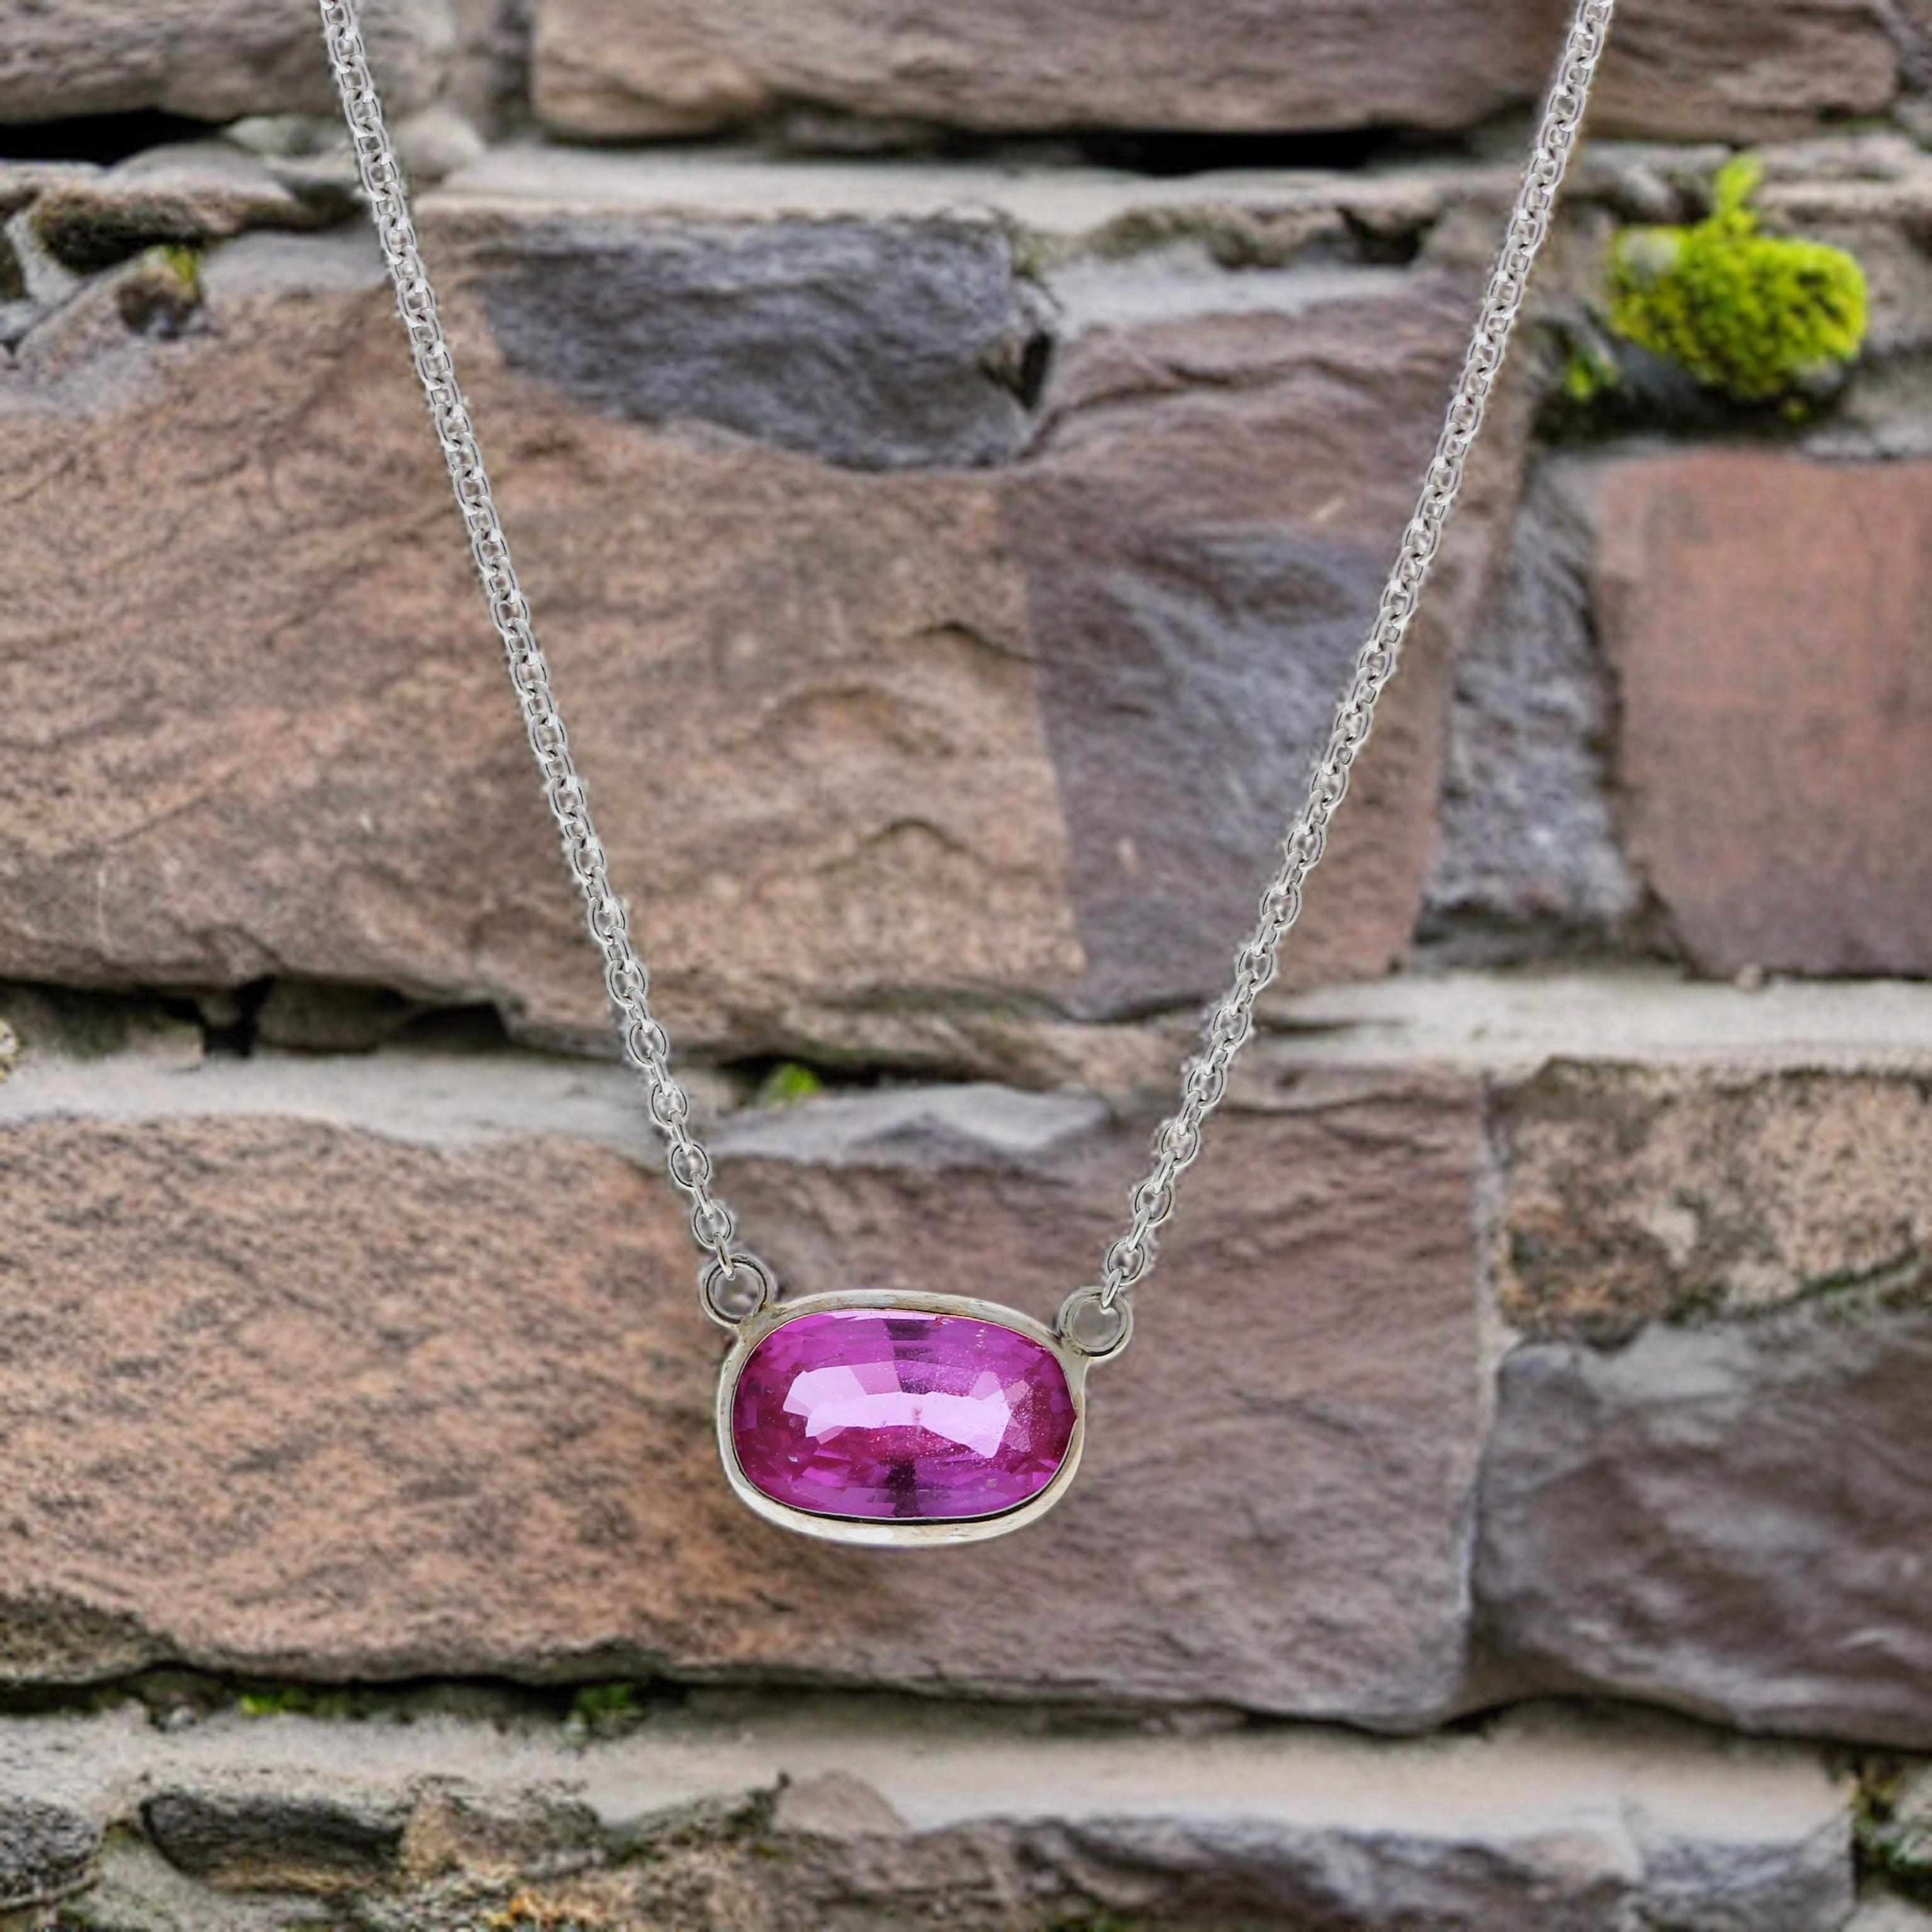 Contemporary 2.15 Carat Cushion Sapphire Pink Fashion Necklaces In 14k White Gold For Sale